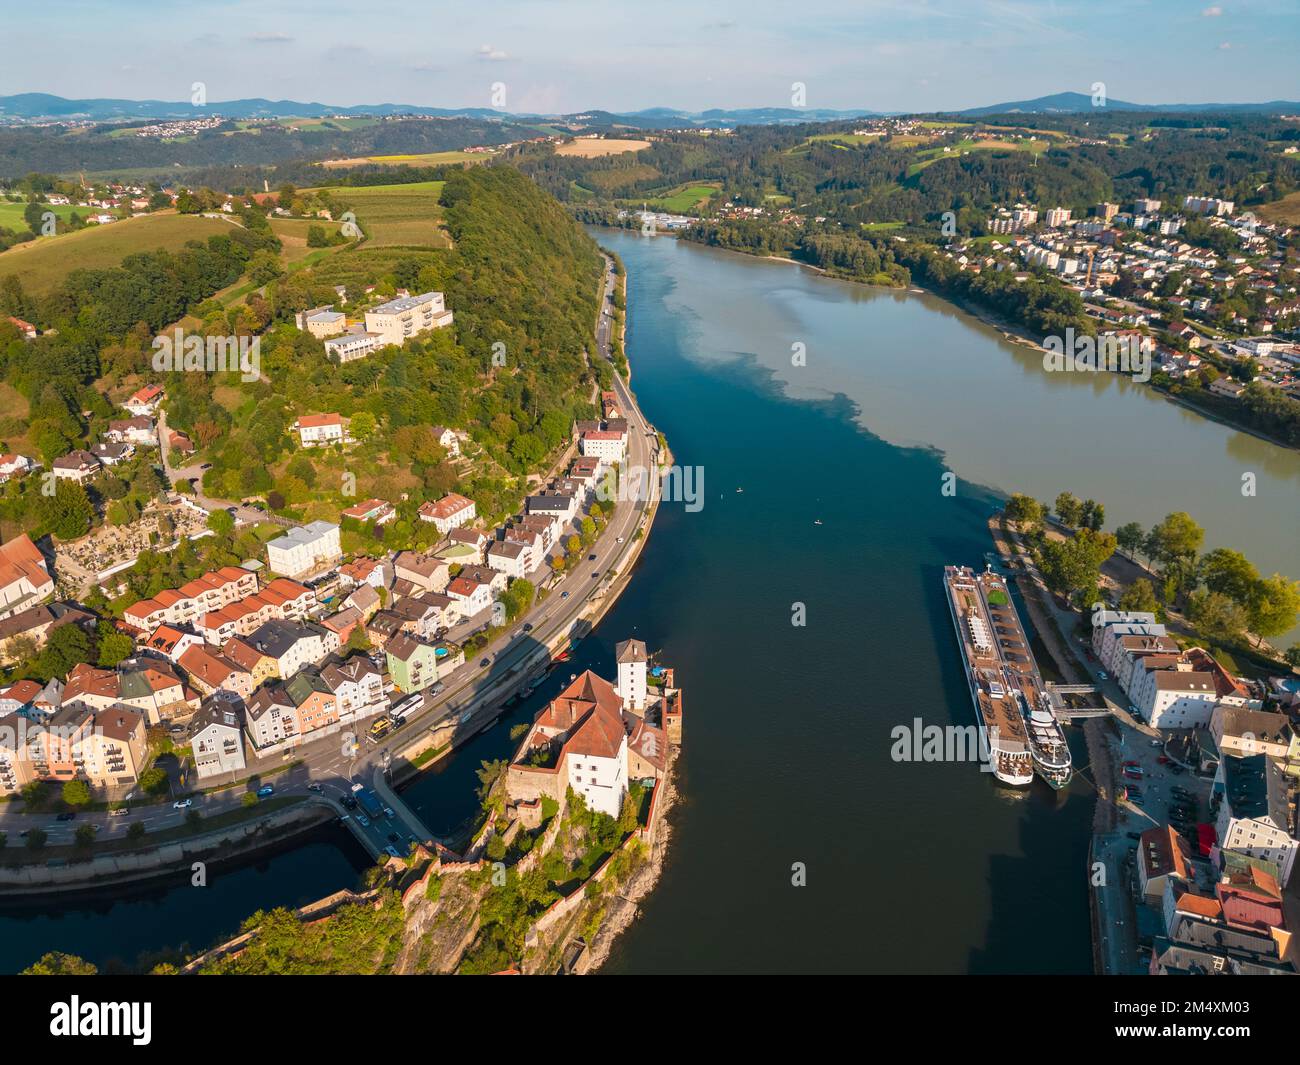 Germany, Bavaria, Passau, Aerial view of confluence of Danube and Ilz rivers Stock Photo